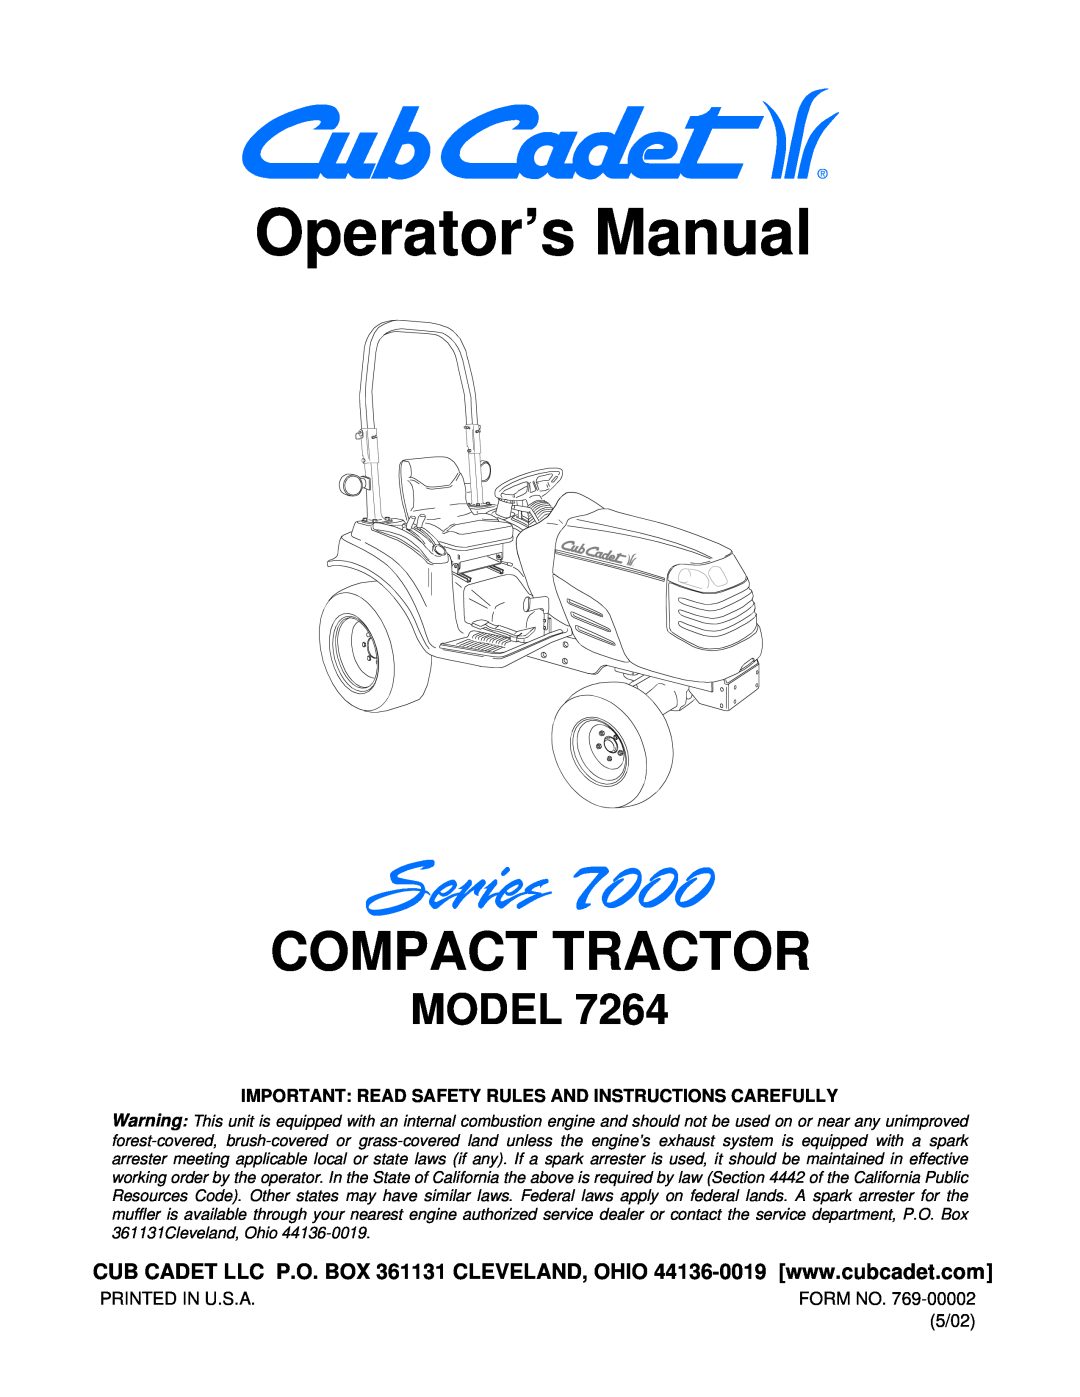 Cub Cadet 7264 manual Model, Important Read Safety Rules And Instructions Carefully, Operator’s Manual, Compact Tractor 